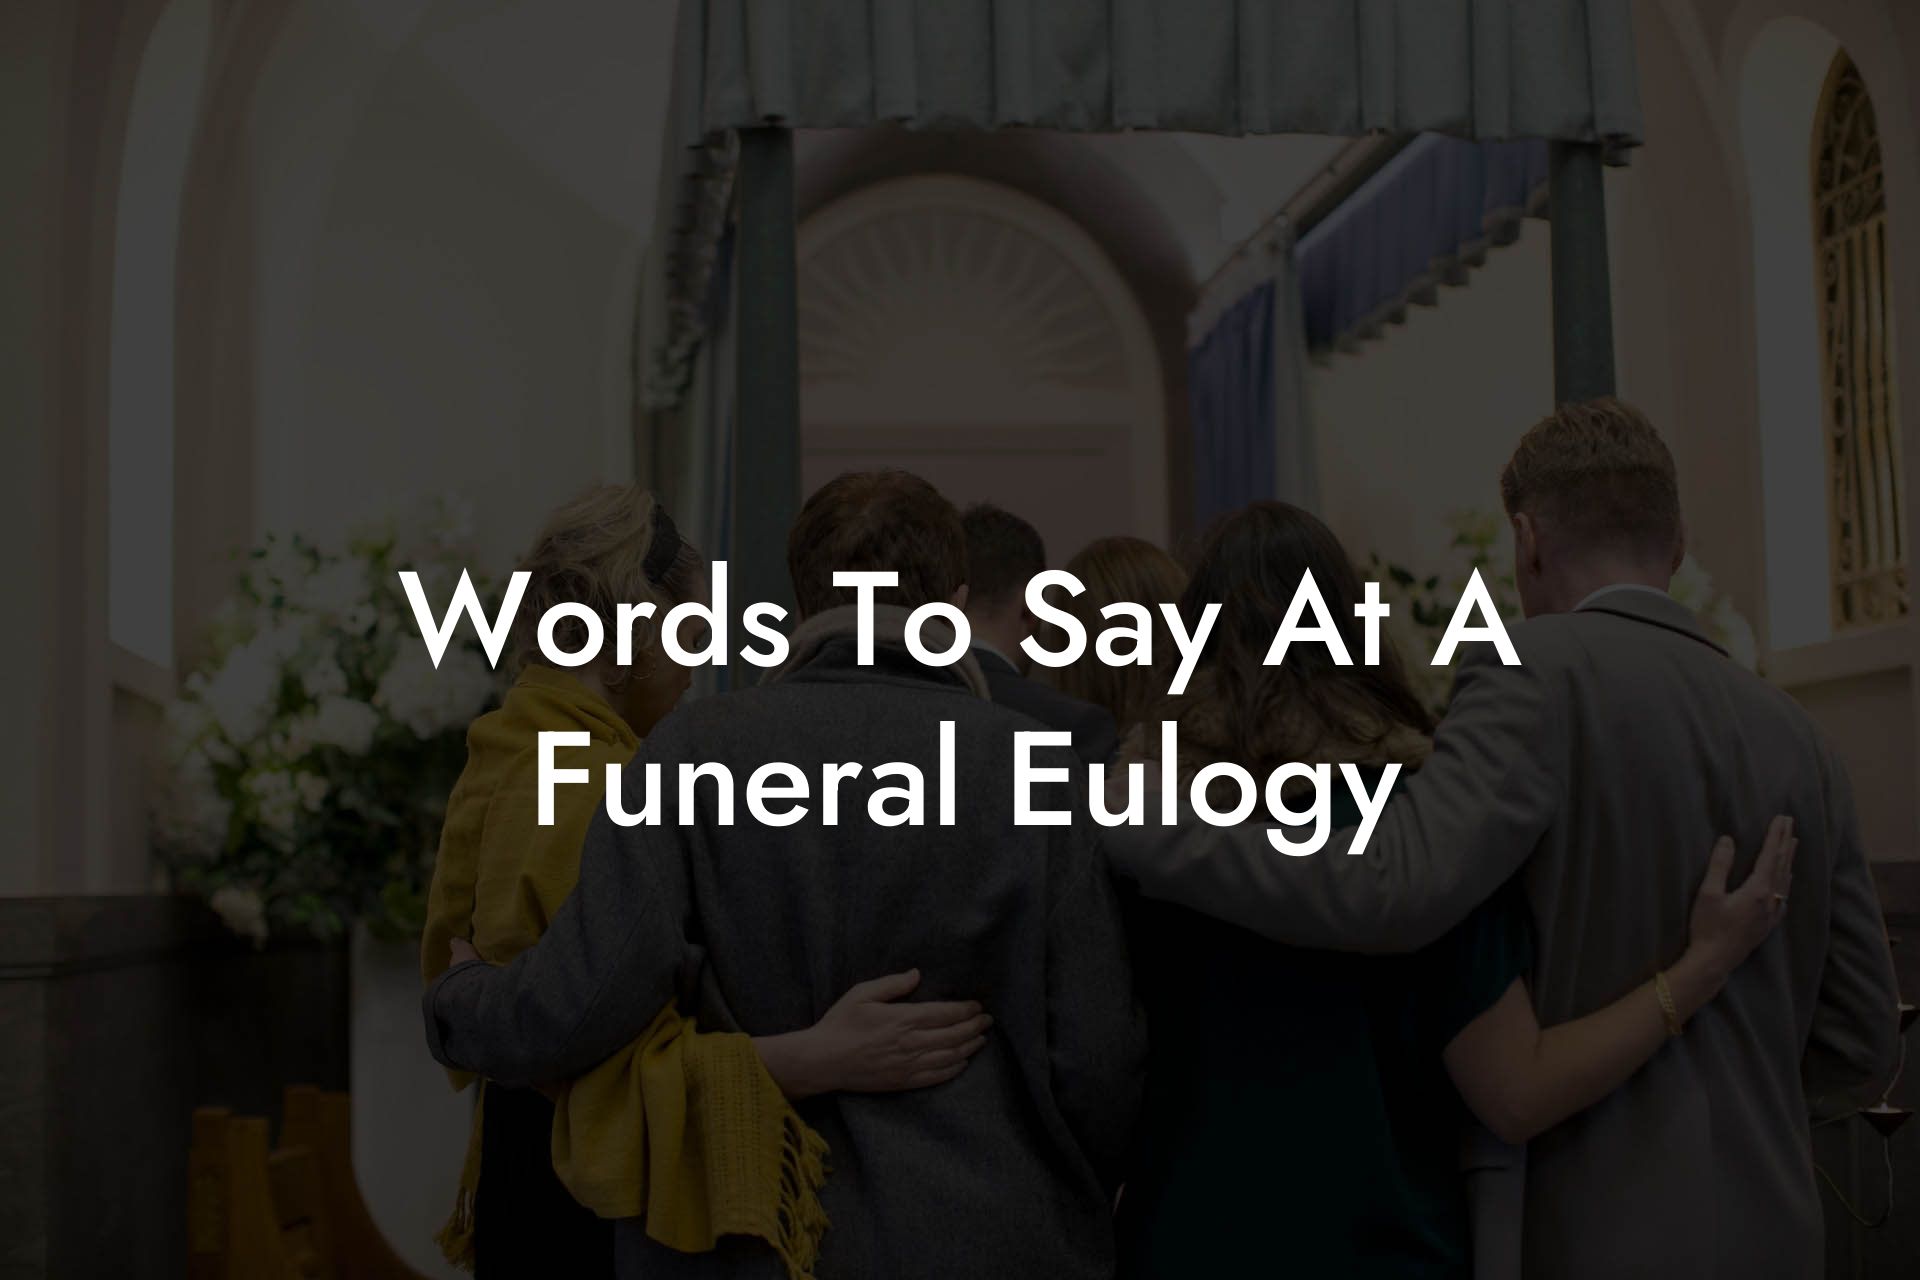 Words To Say At A Funeral Eulogy